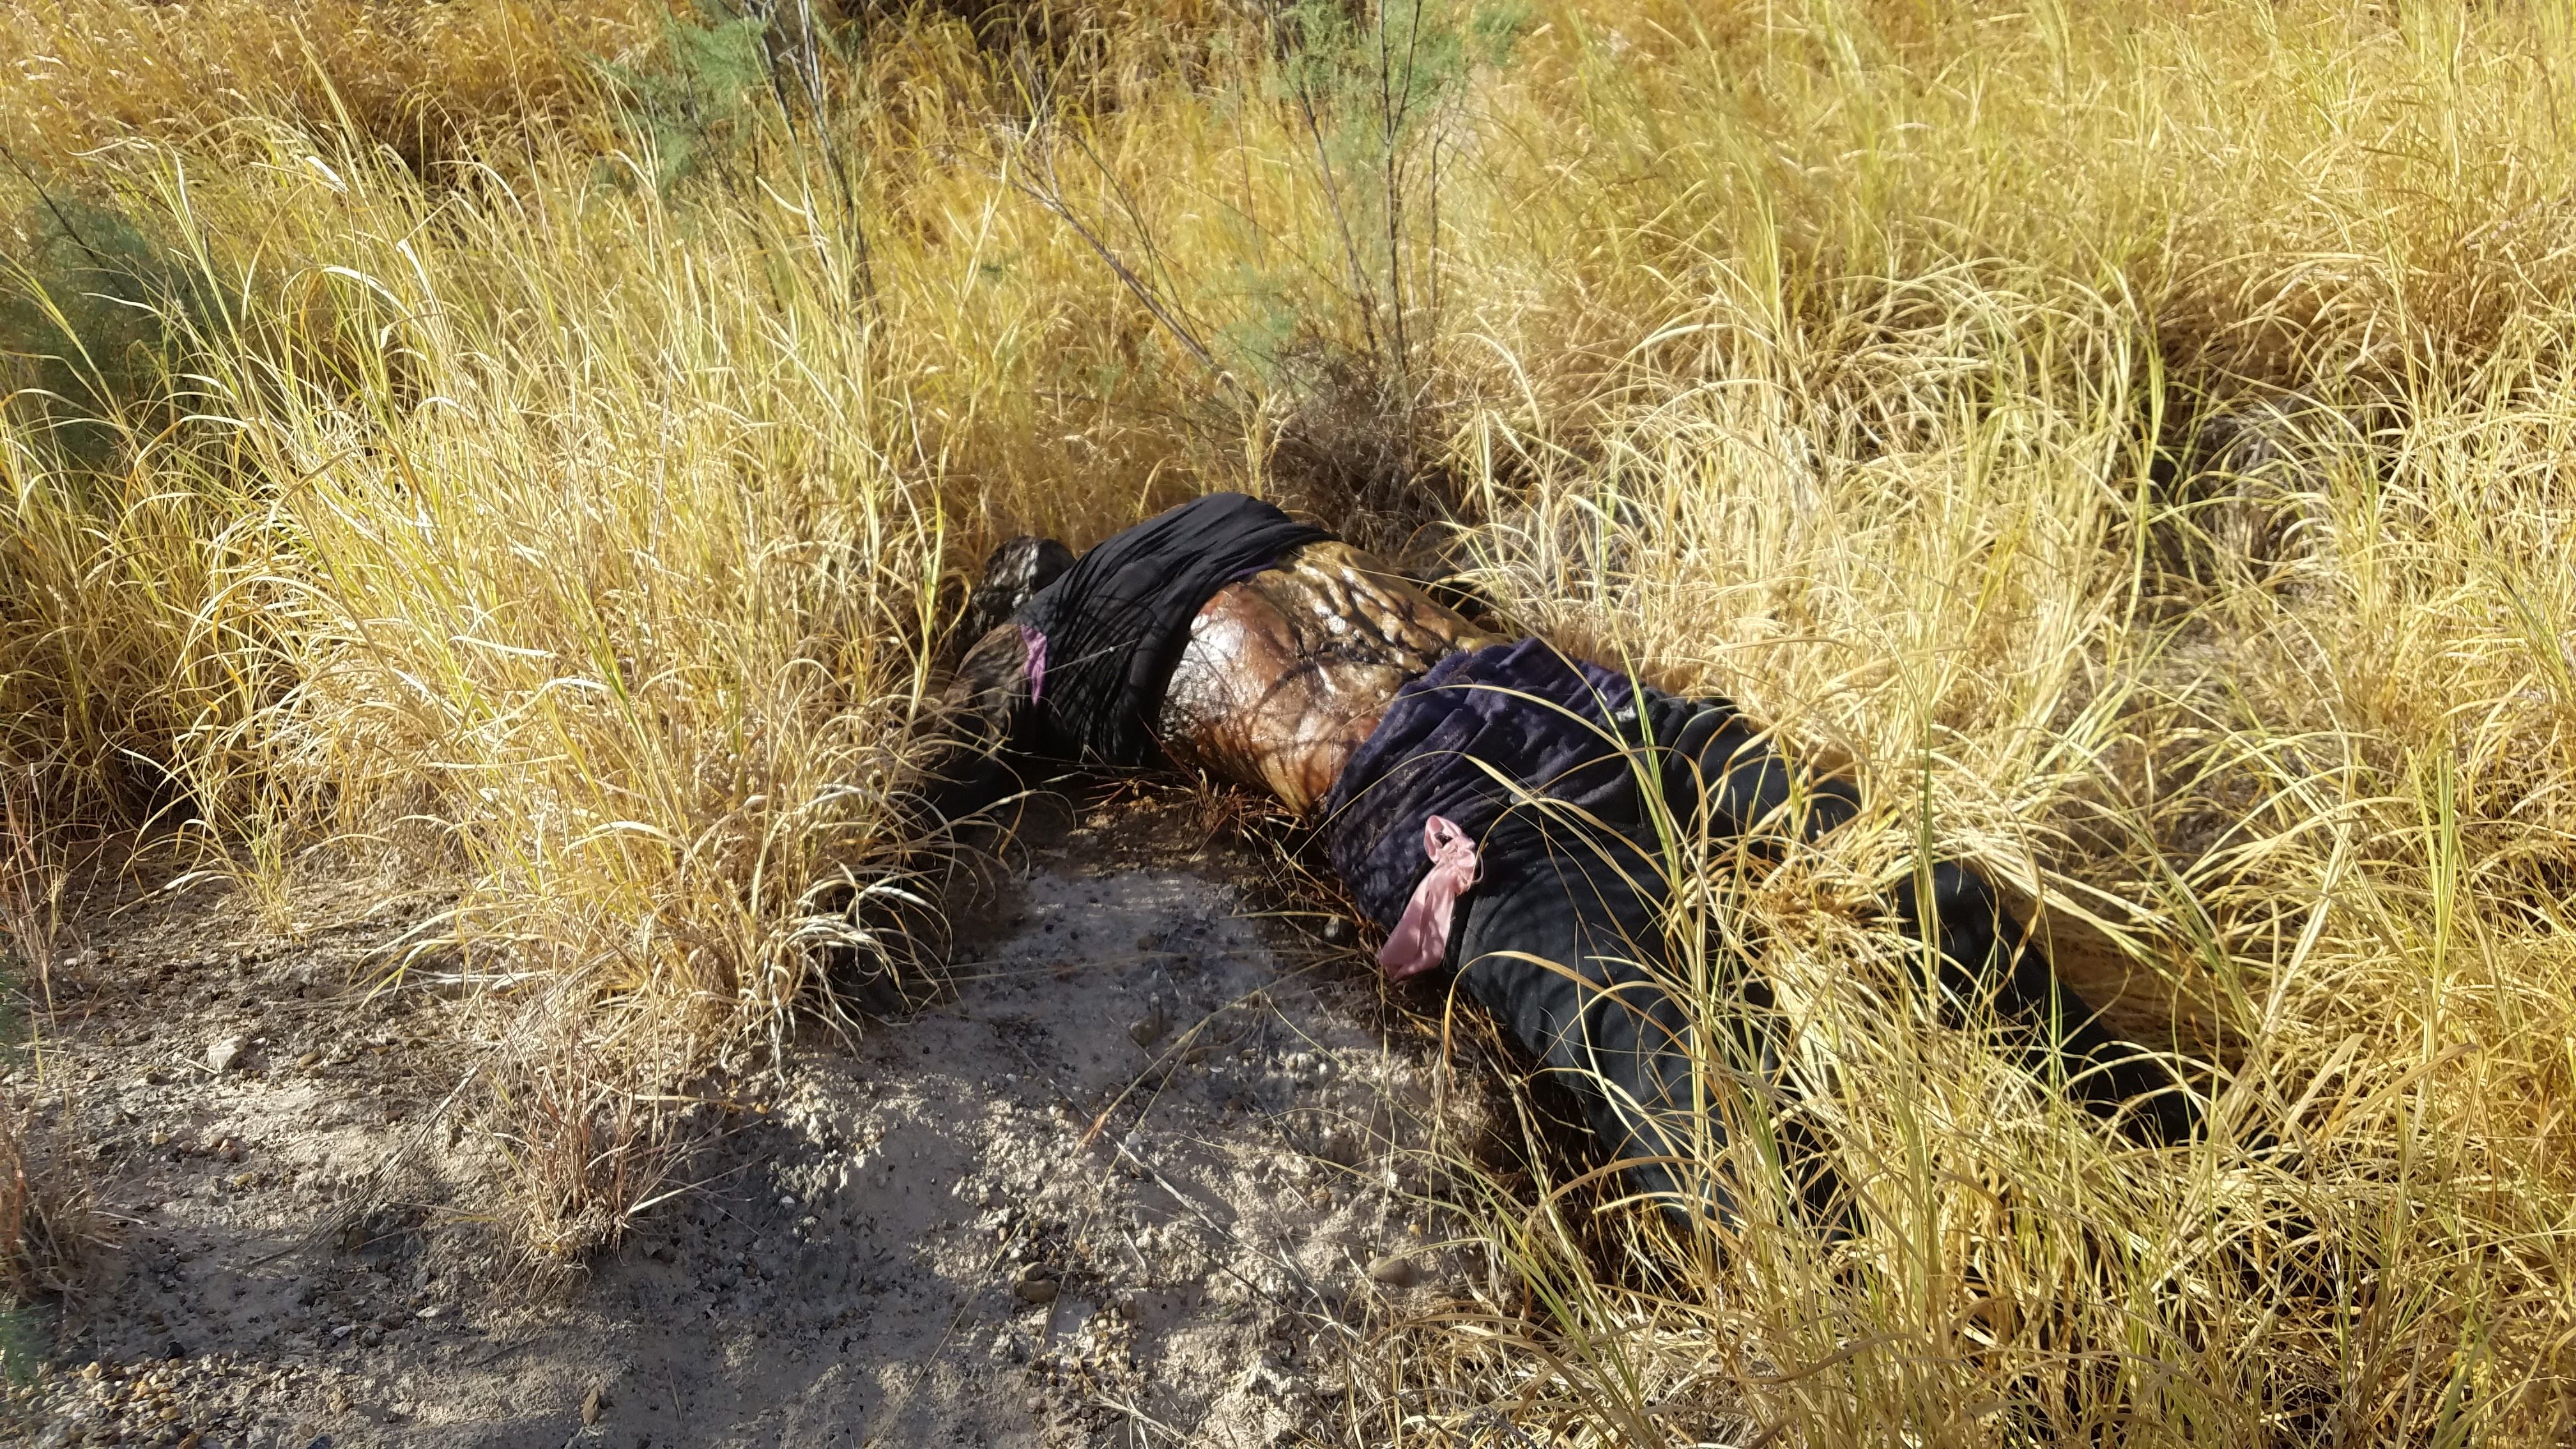 The body of a woman found on August 1, 2016 near Sullivan City, Texas, identified as that of Thelma Morales, 41, of Esquipulas, Guatemala. Image by Kristian Hernandez. United States, 2016.